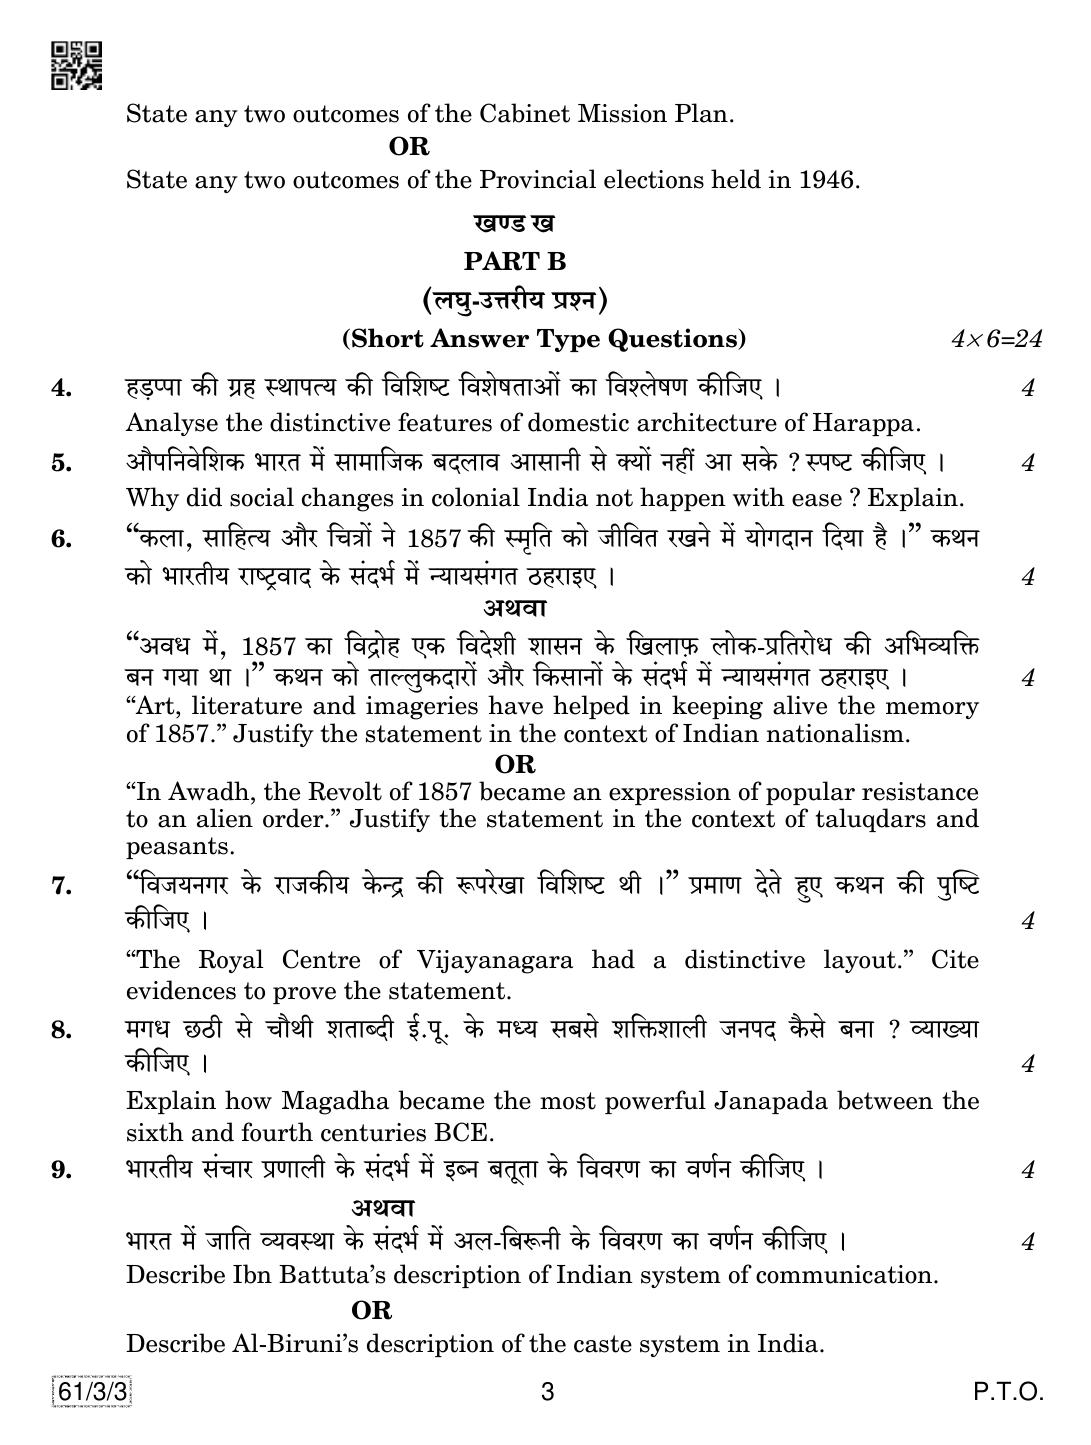 CBSE Class 12 61-3-3 History 2019 Question Paper - Page 3